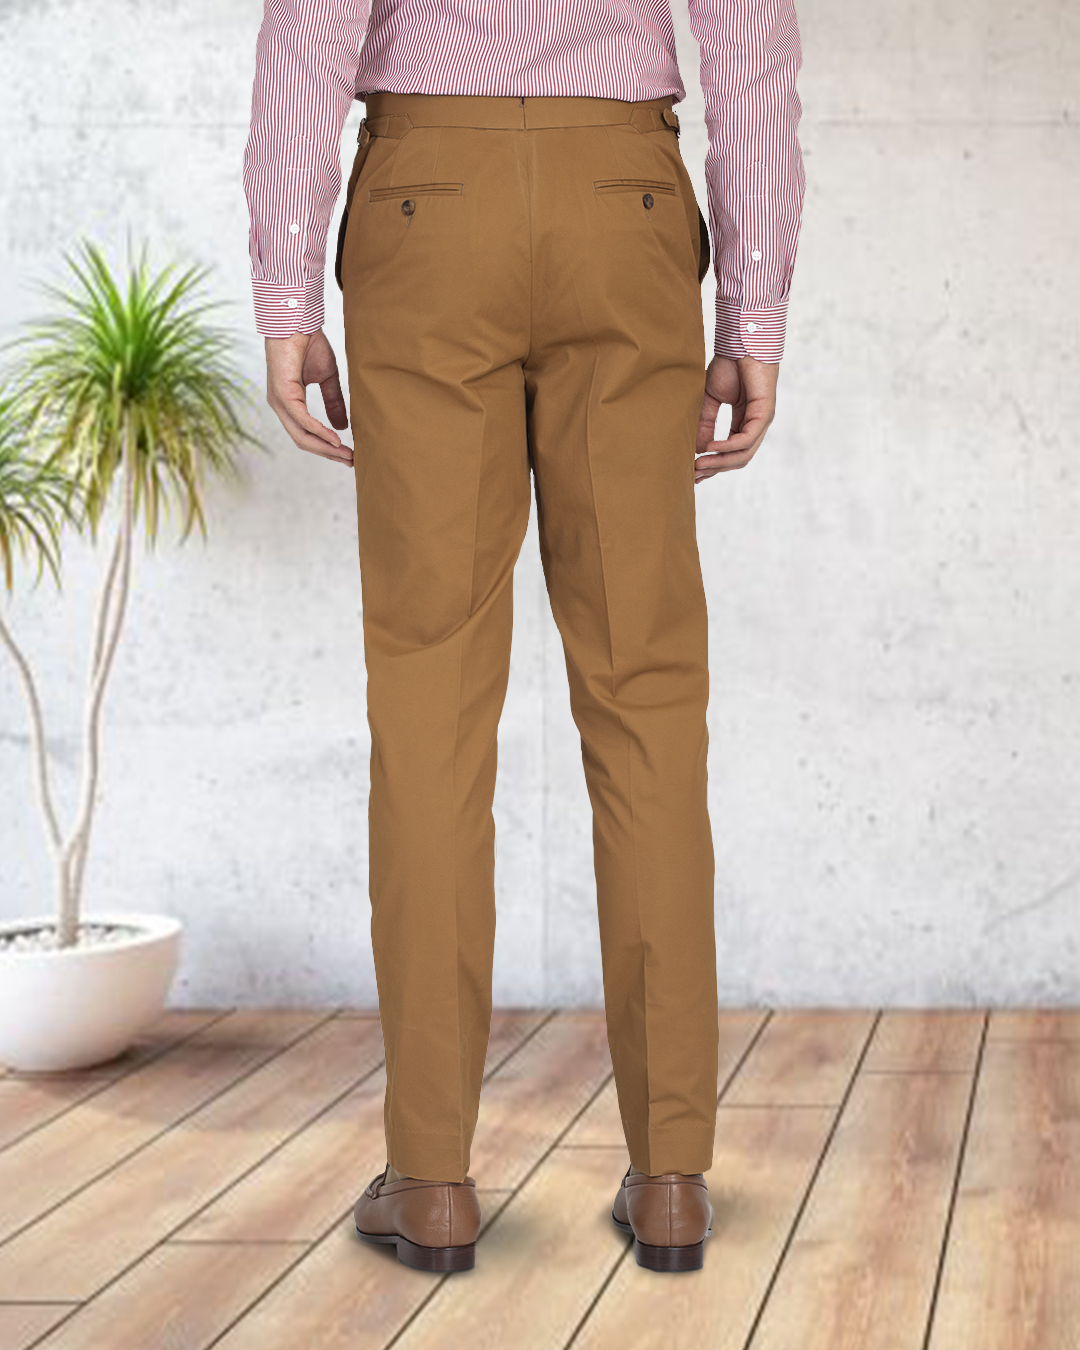 Back view of model wearing custom Genoa Chino pants for men by Luxire in copper